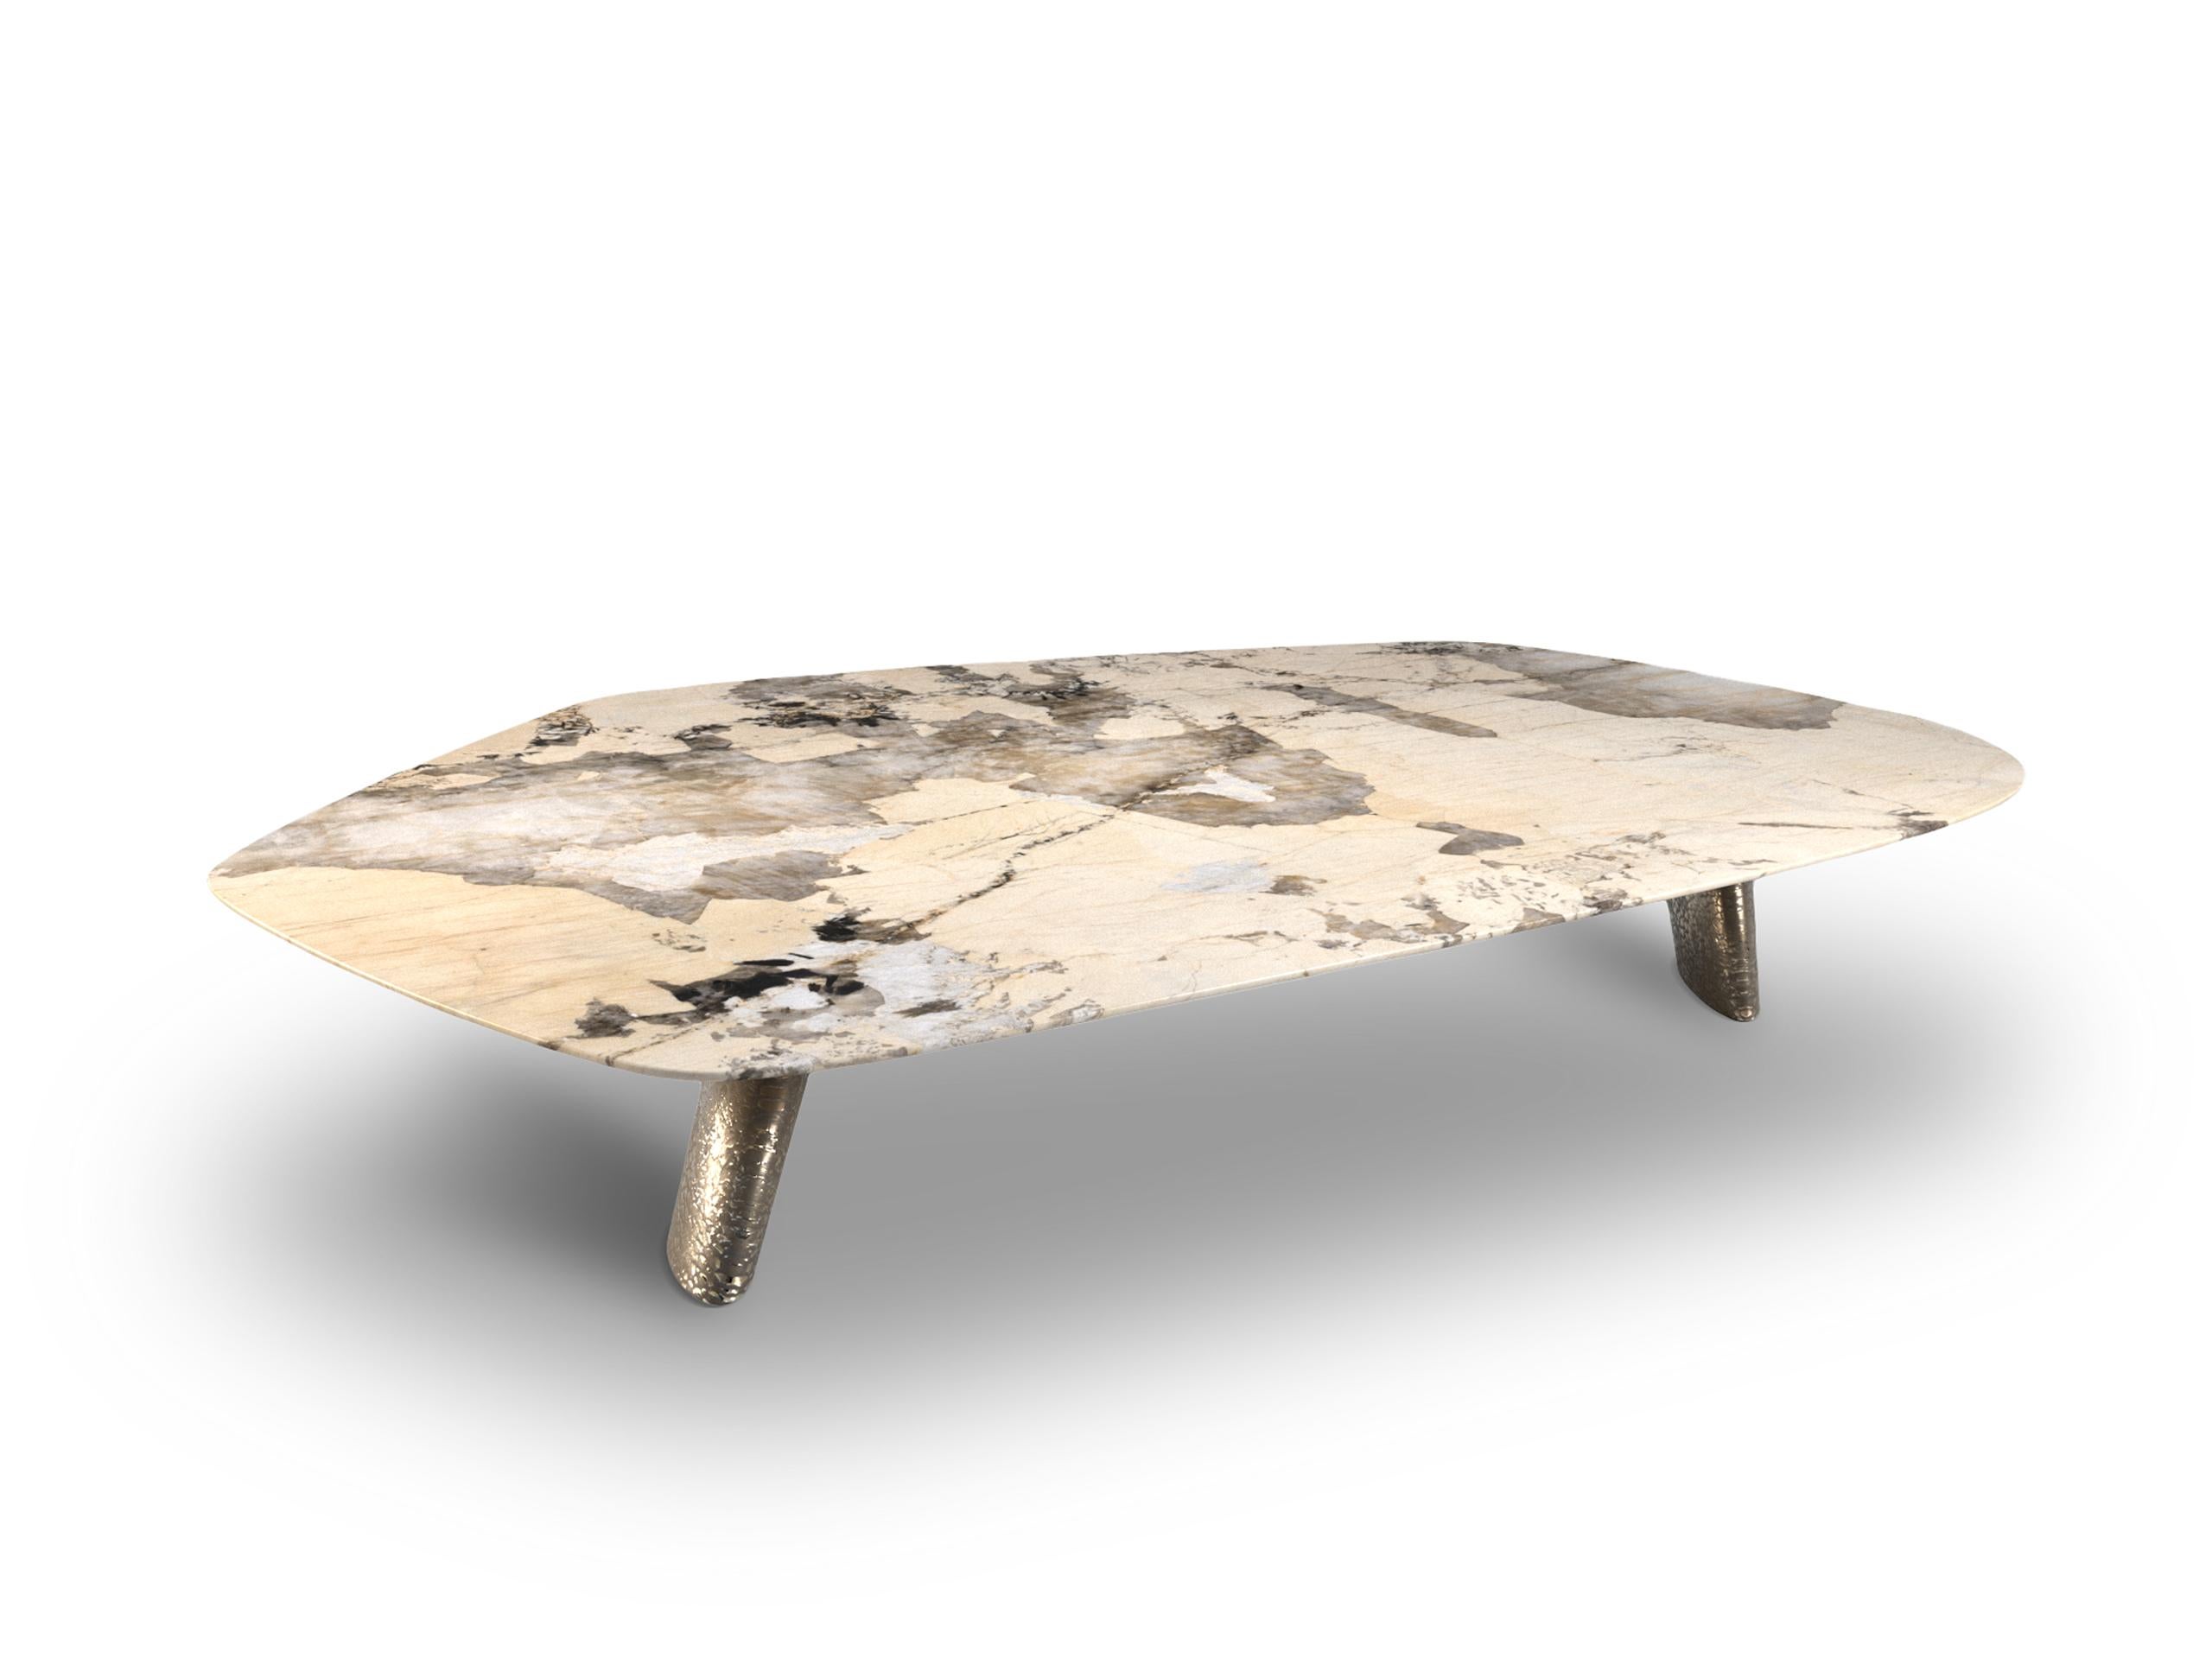 The elements III coffee table by Grzegorz Majka
Edition 1 of 1
Dimensions: D 121 x W 150 x H 33 cm
Materials: Marble, solid stainless steel plate in brushed finish

The Elements III is one of a kind and one of the series of various coffee